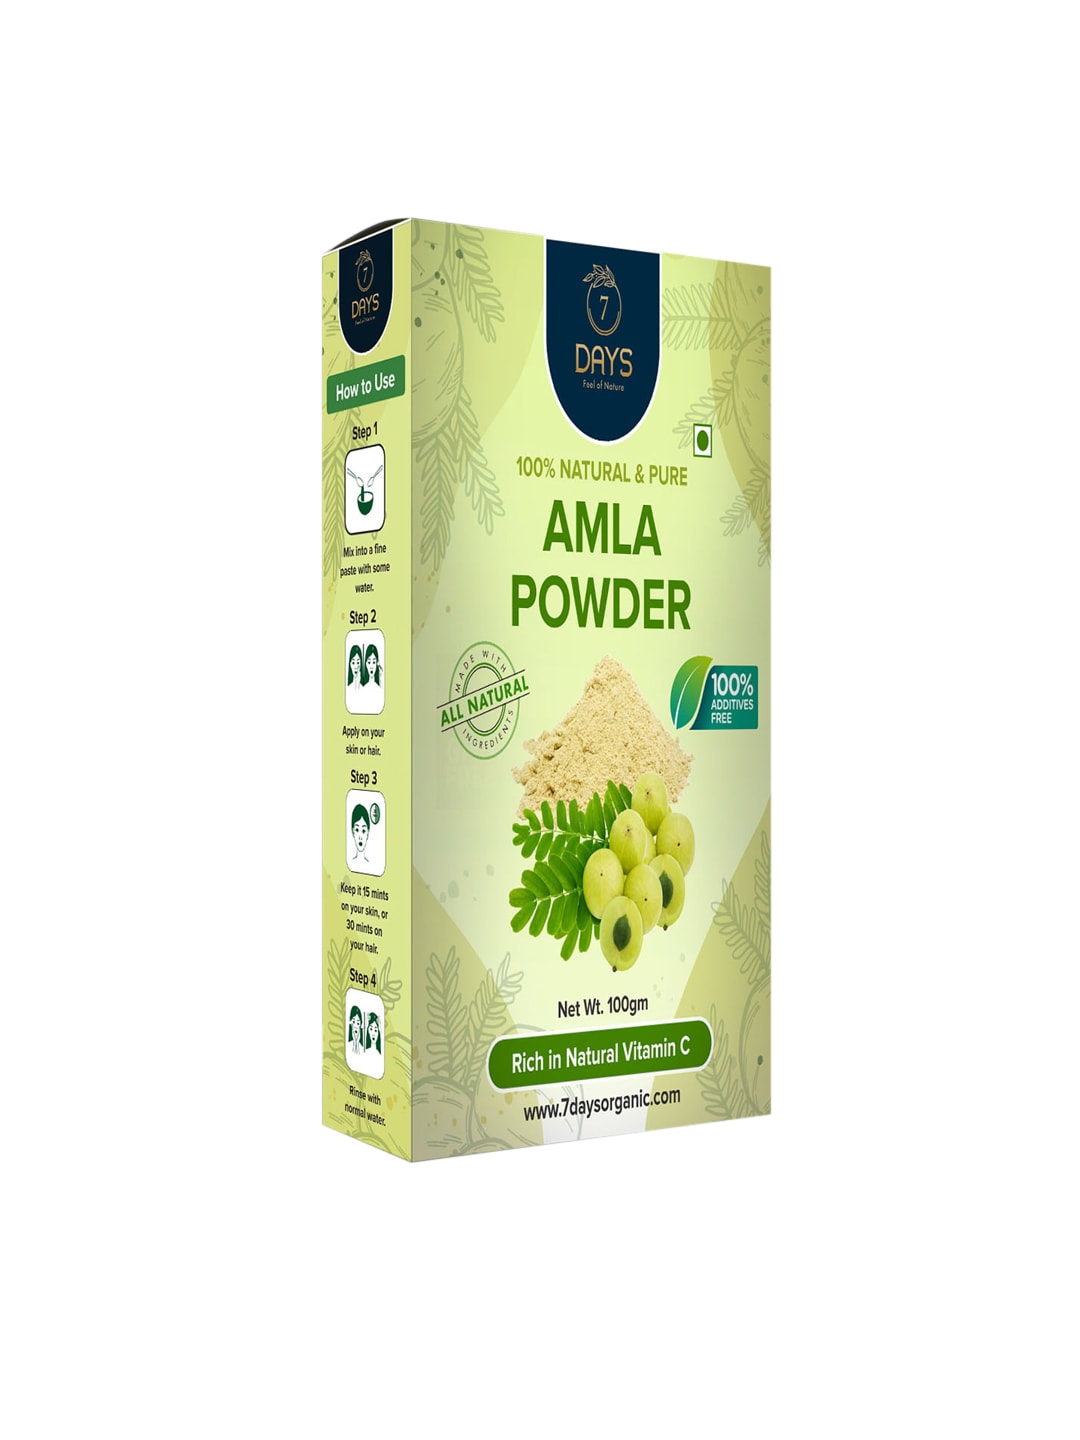 7 DAYS 100% Natural & Pure Amla Powder for Hair & Skin - 100 g Price in India